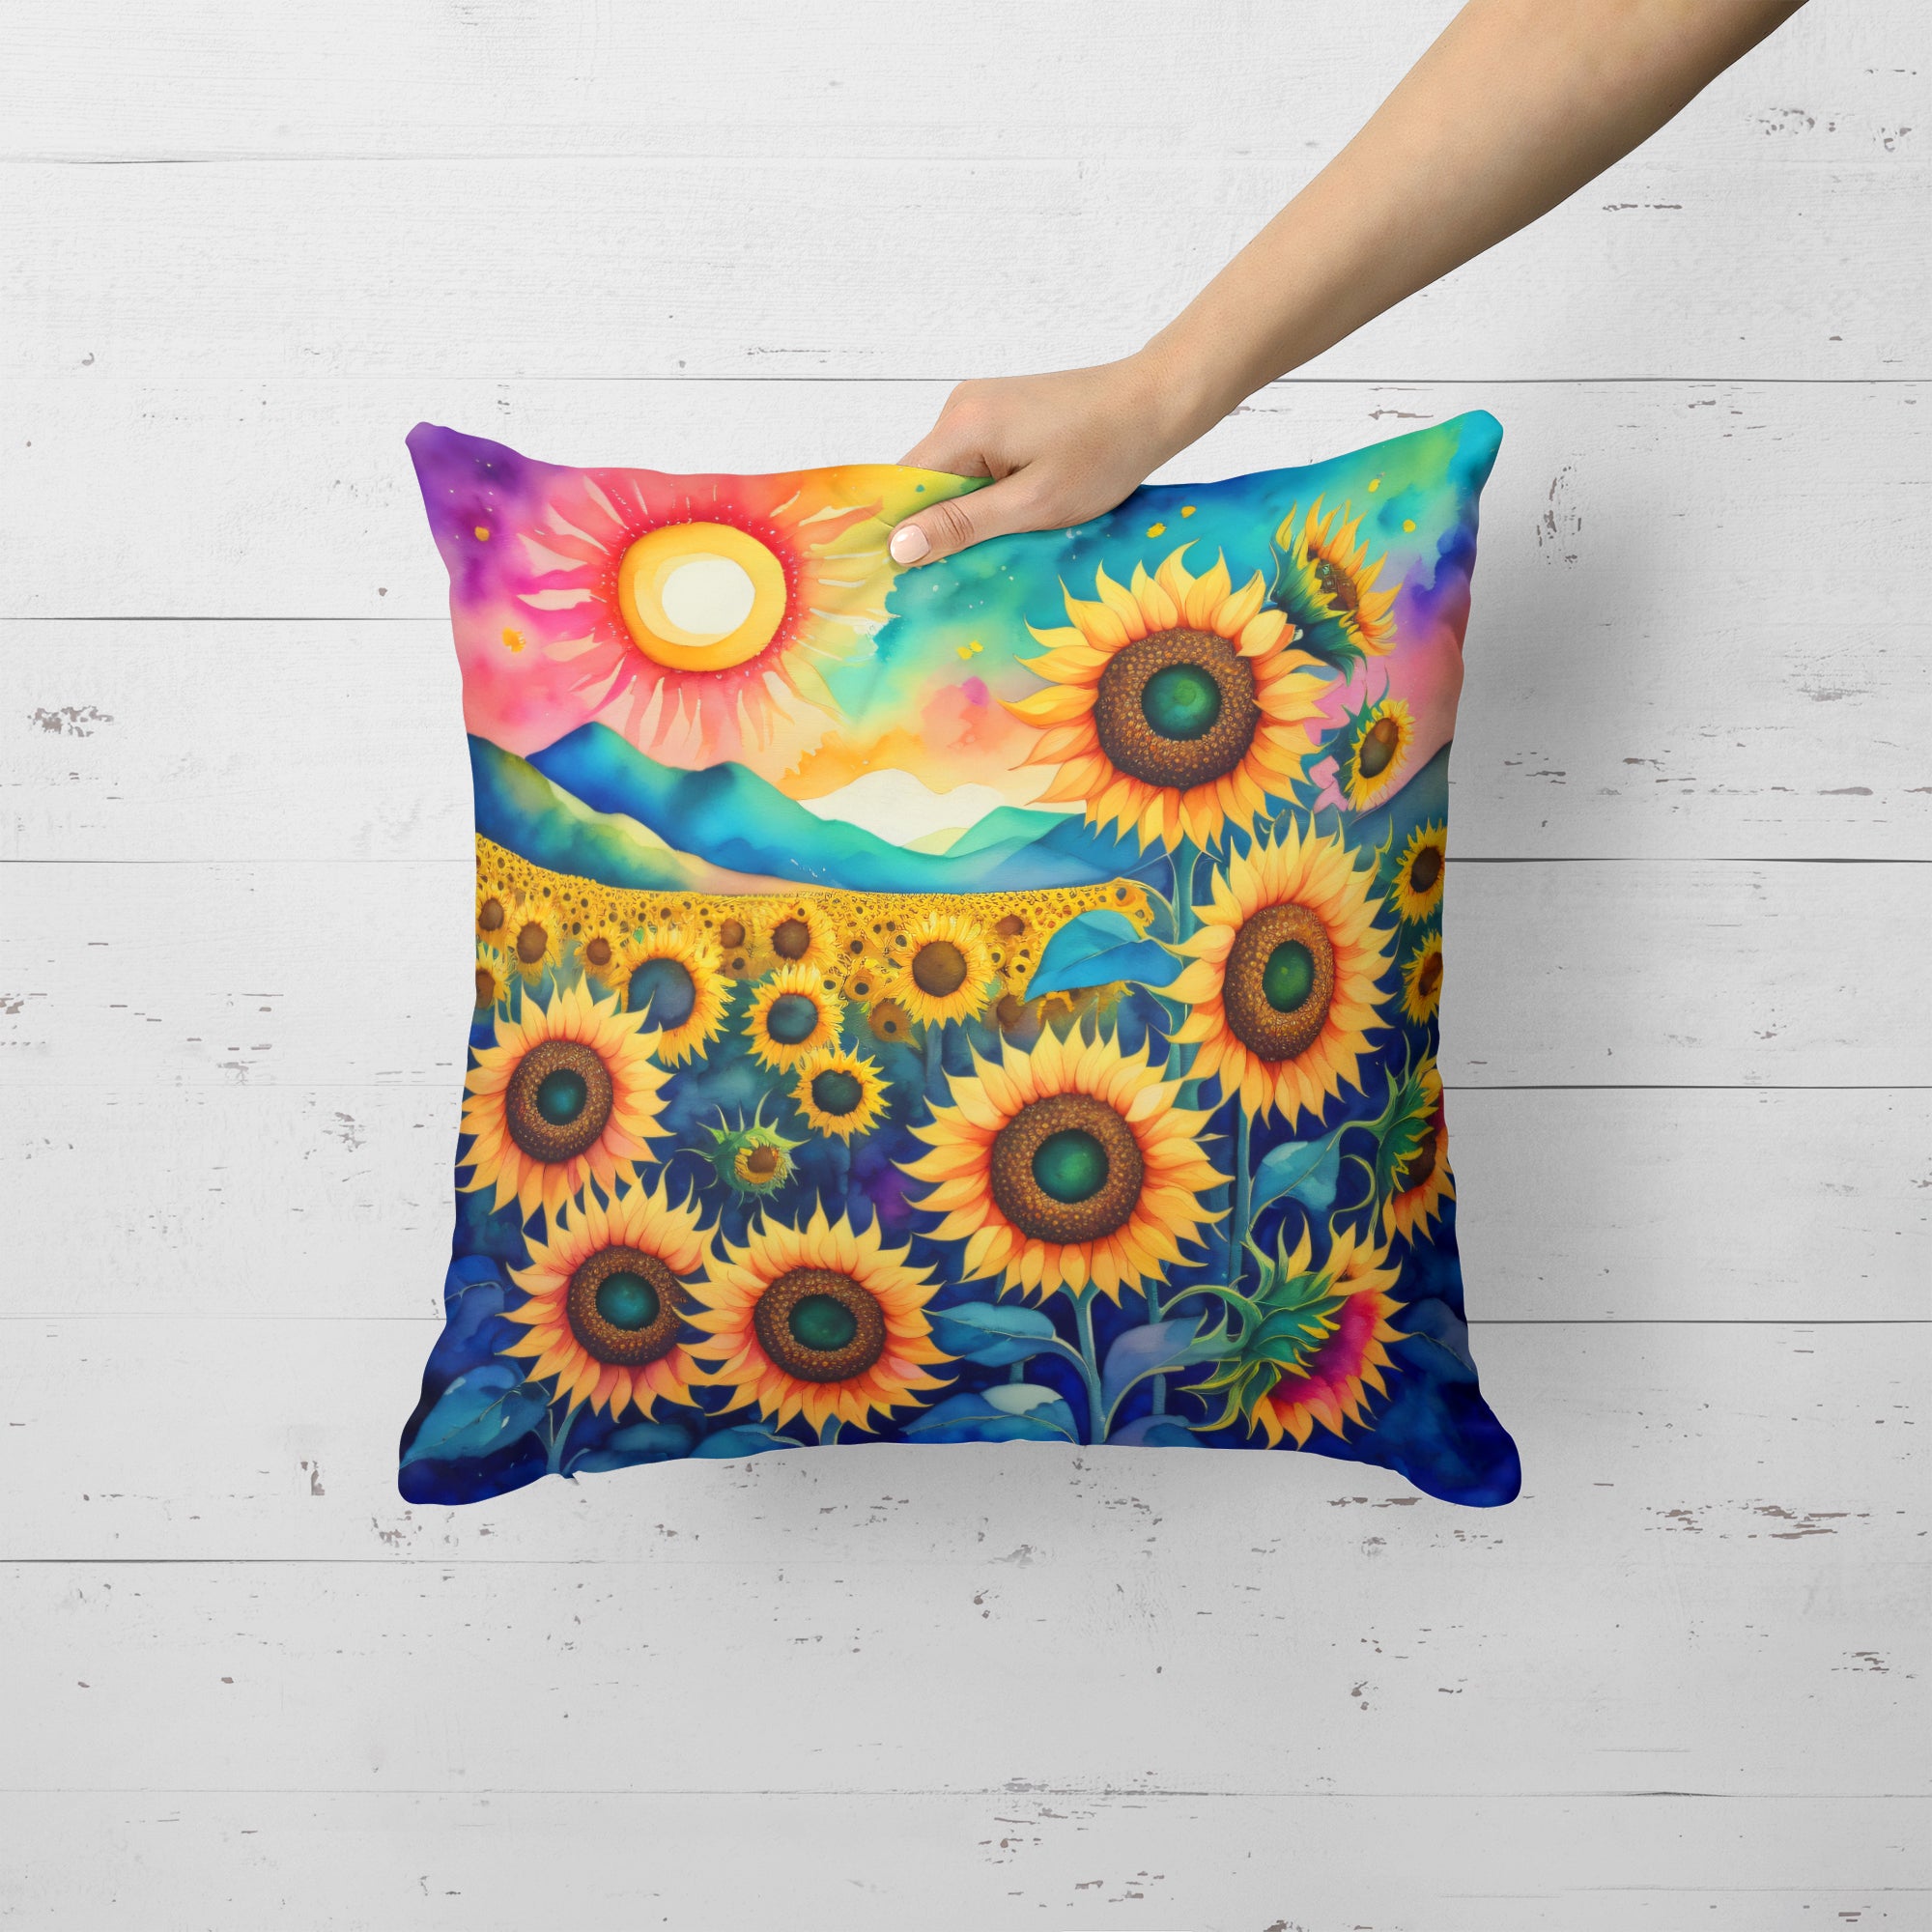 Buy this Colorful Sunflowers Fabric Decorative Pillow